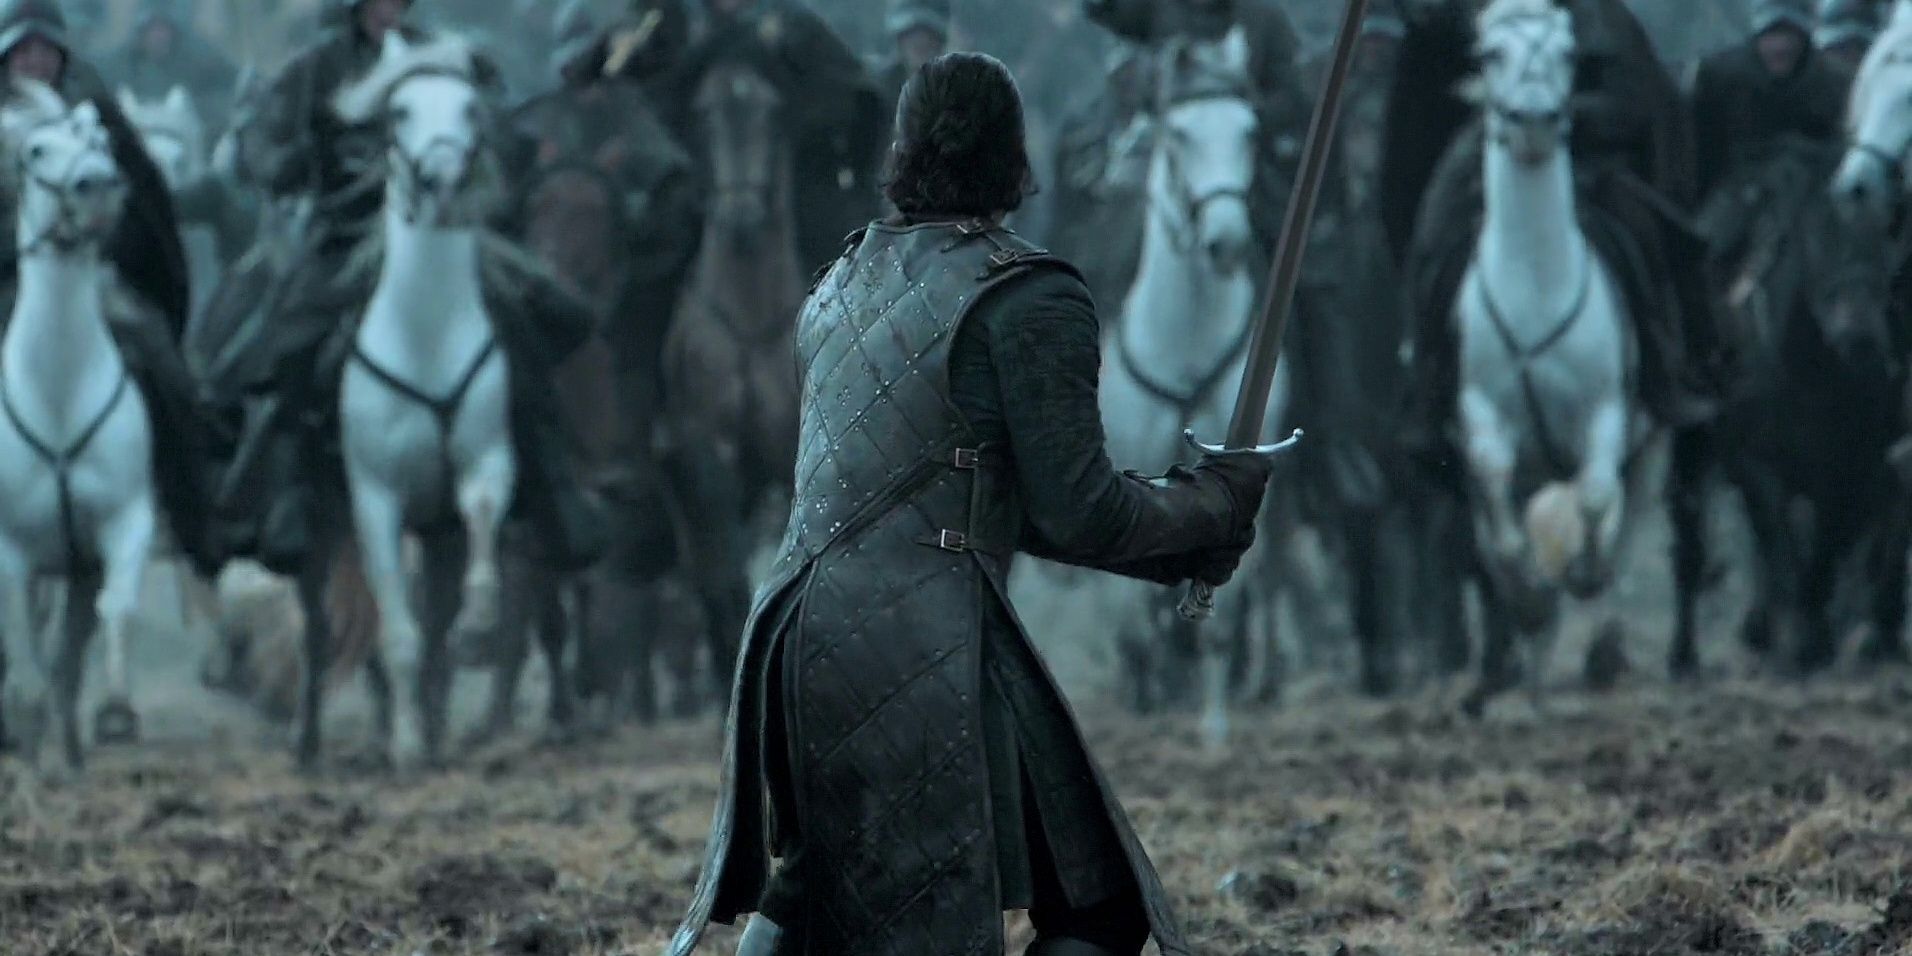 Jon Snow with his sword preparing for battle of bastards in Game of Thrones